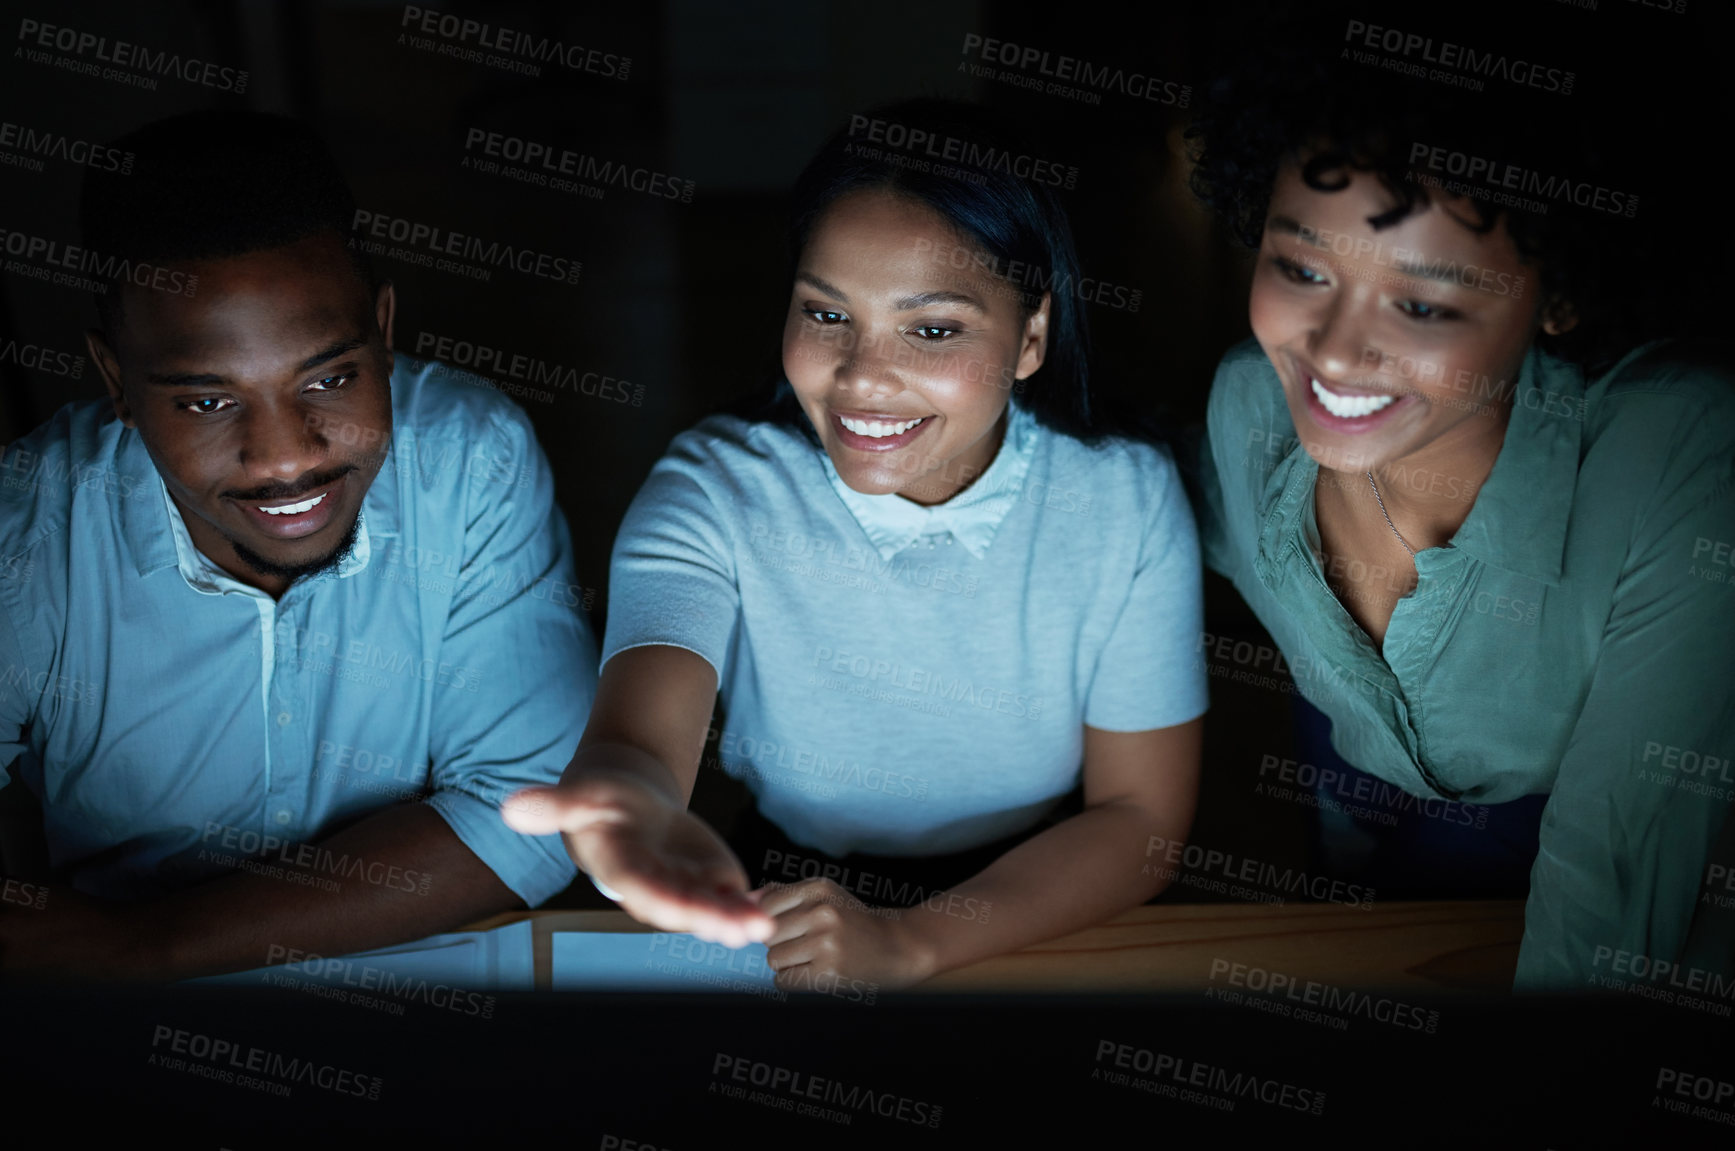 Buy stock photo Shot of a group of young businesspeople using a computer together during a late night at work